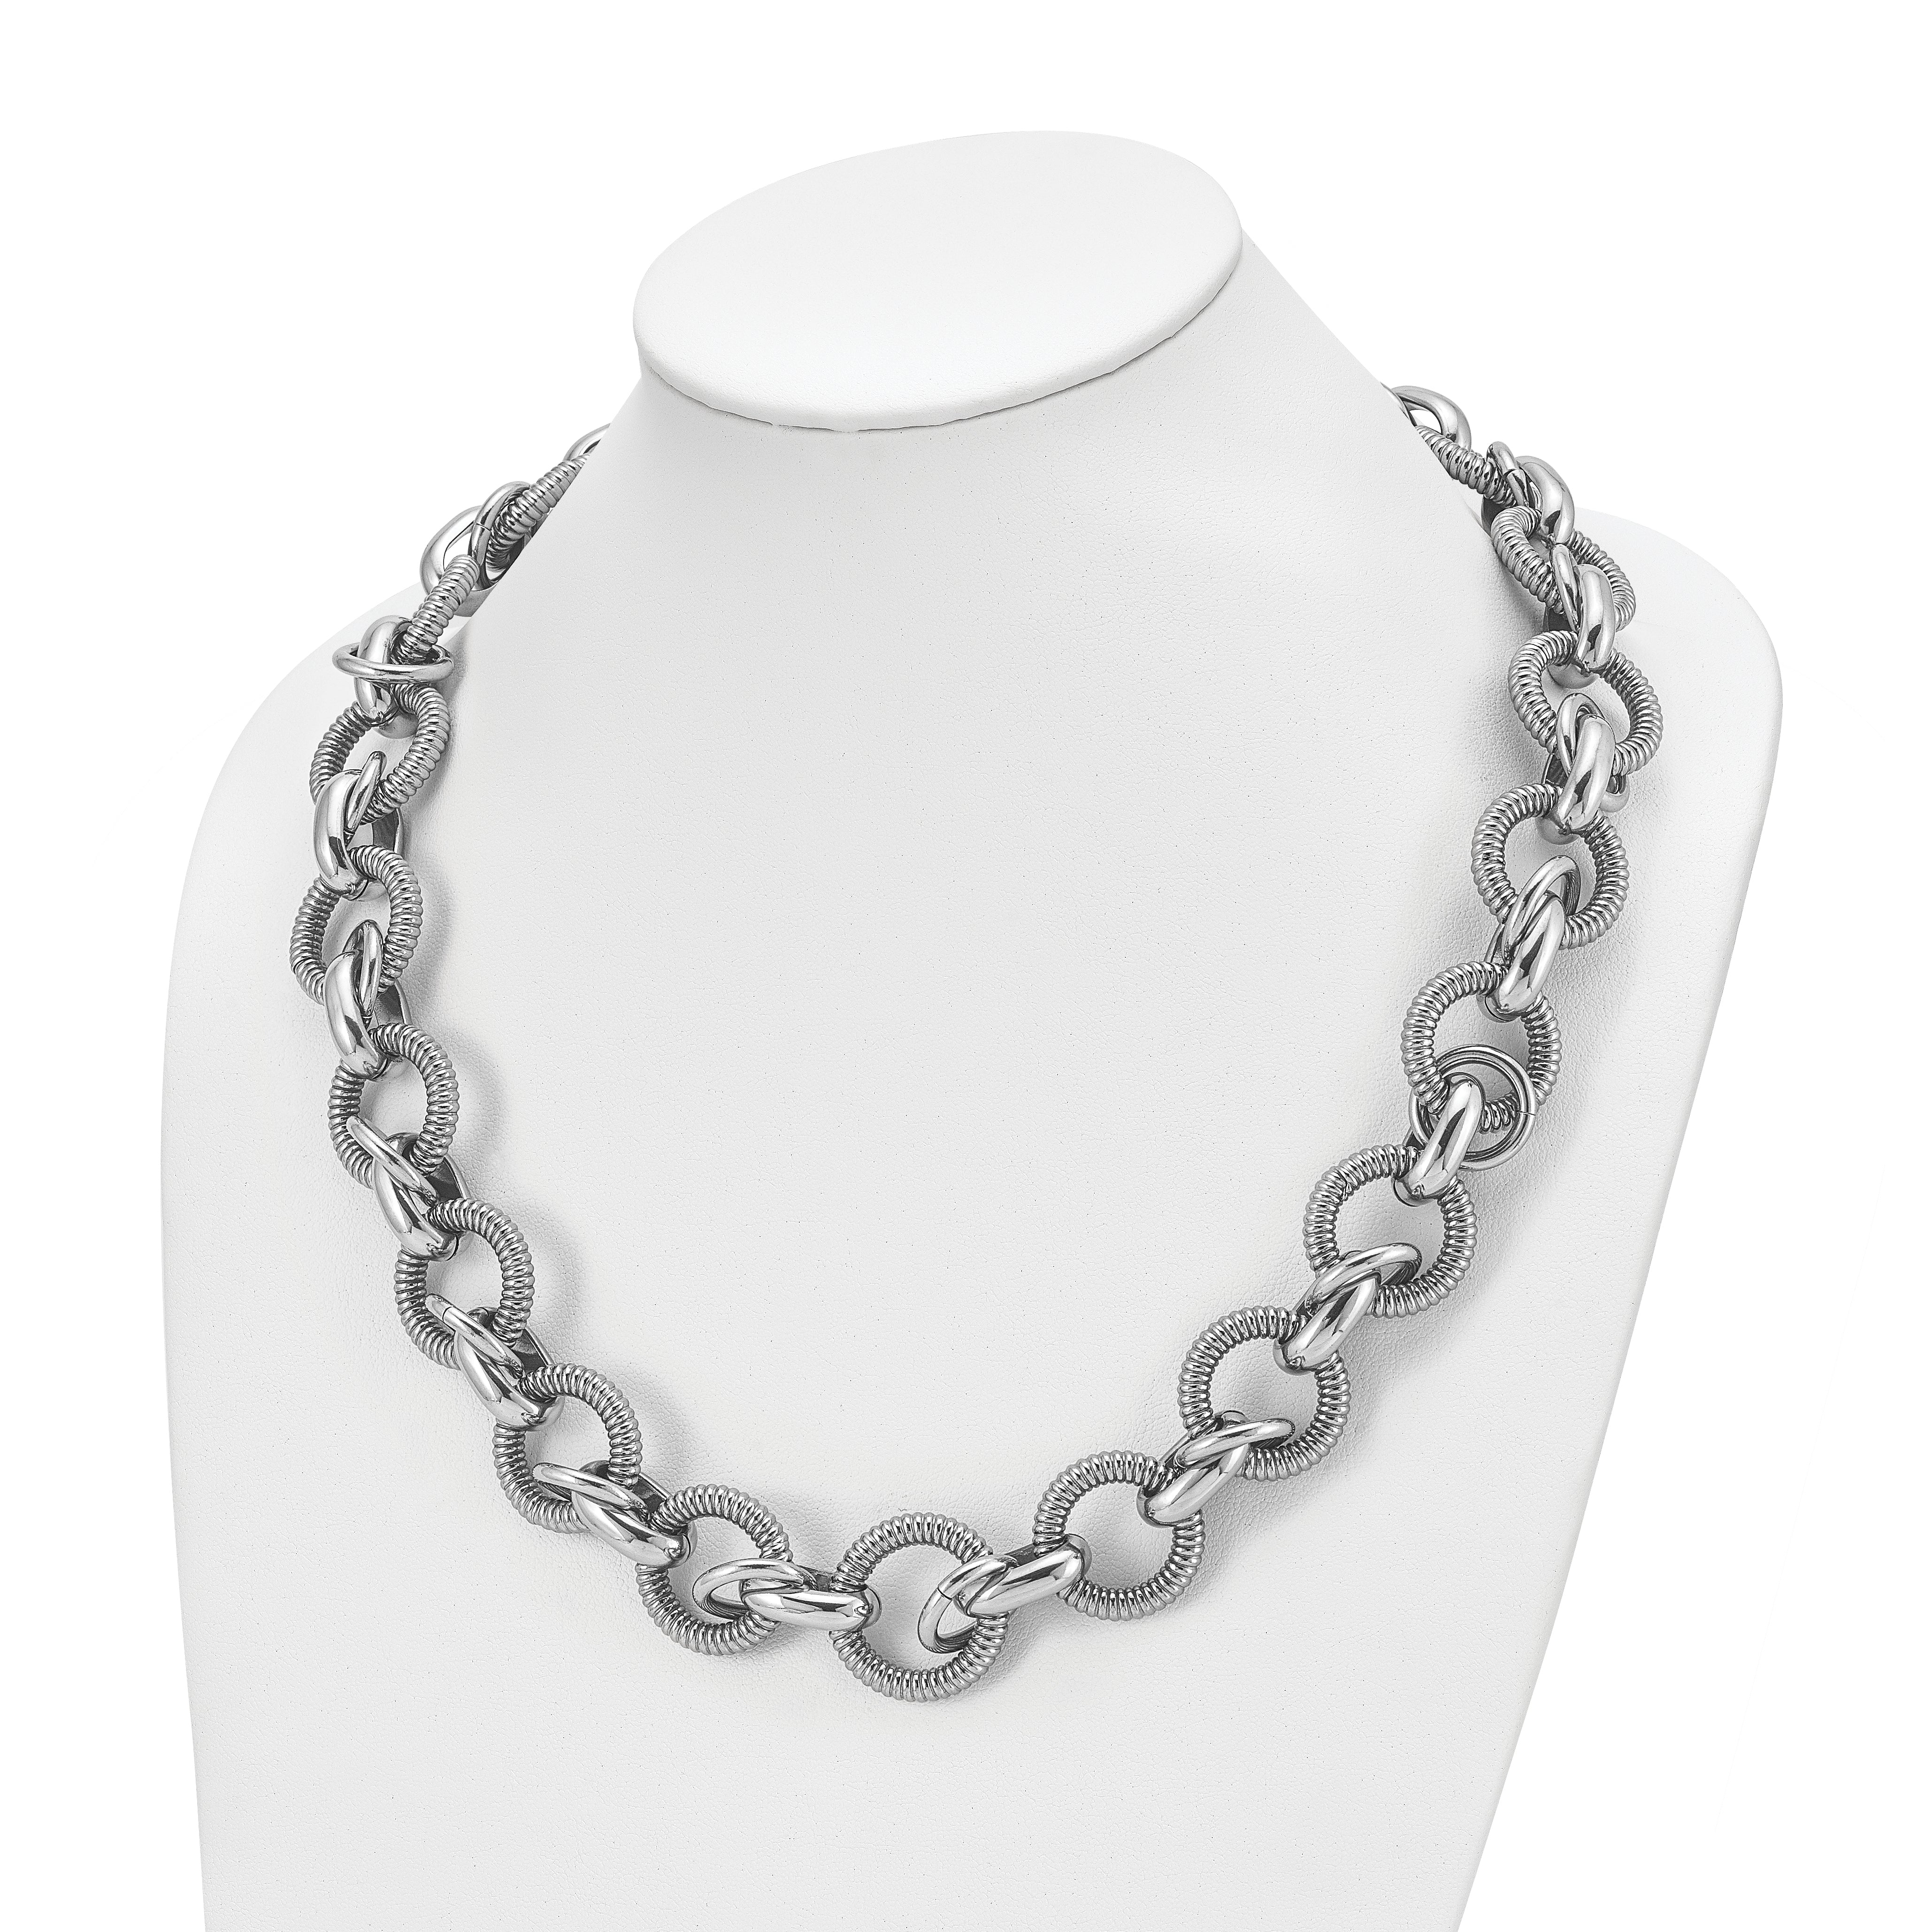 Stainless Steel Polished Fancy Link 22in Necklace